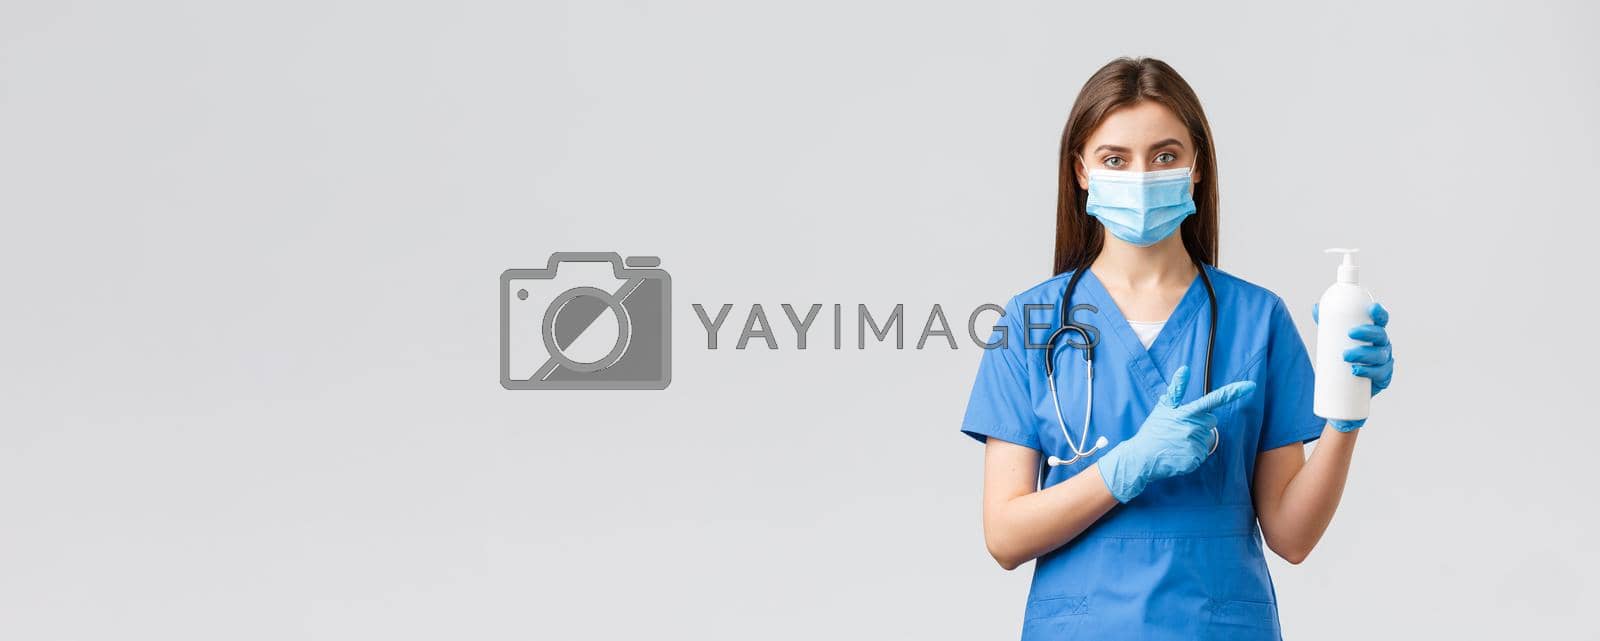 Covid-19, preventing virus, health, healthcare workers and quarantine concept. Young pretty female nurse or doctor in blue scrubs, medical mask and gloves, pointing at hand sanitizer, soap.